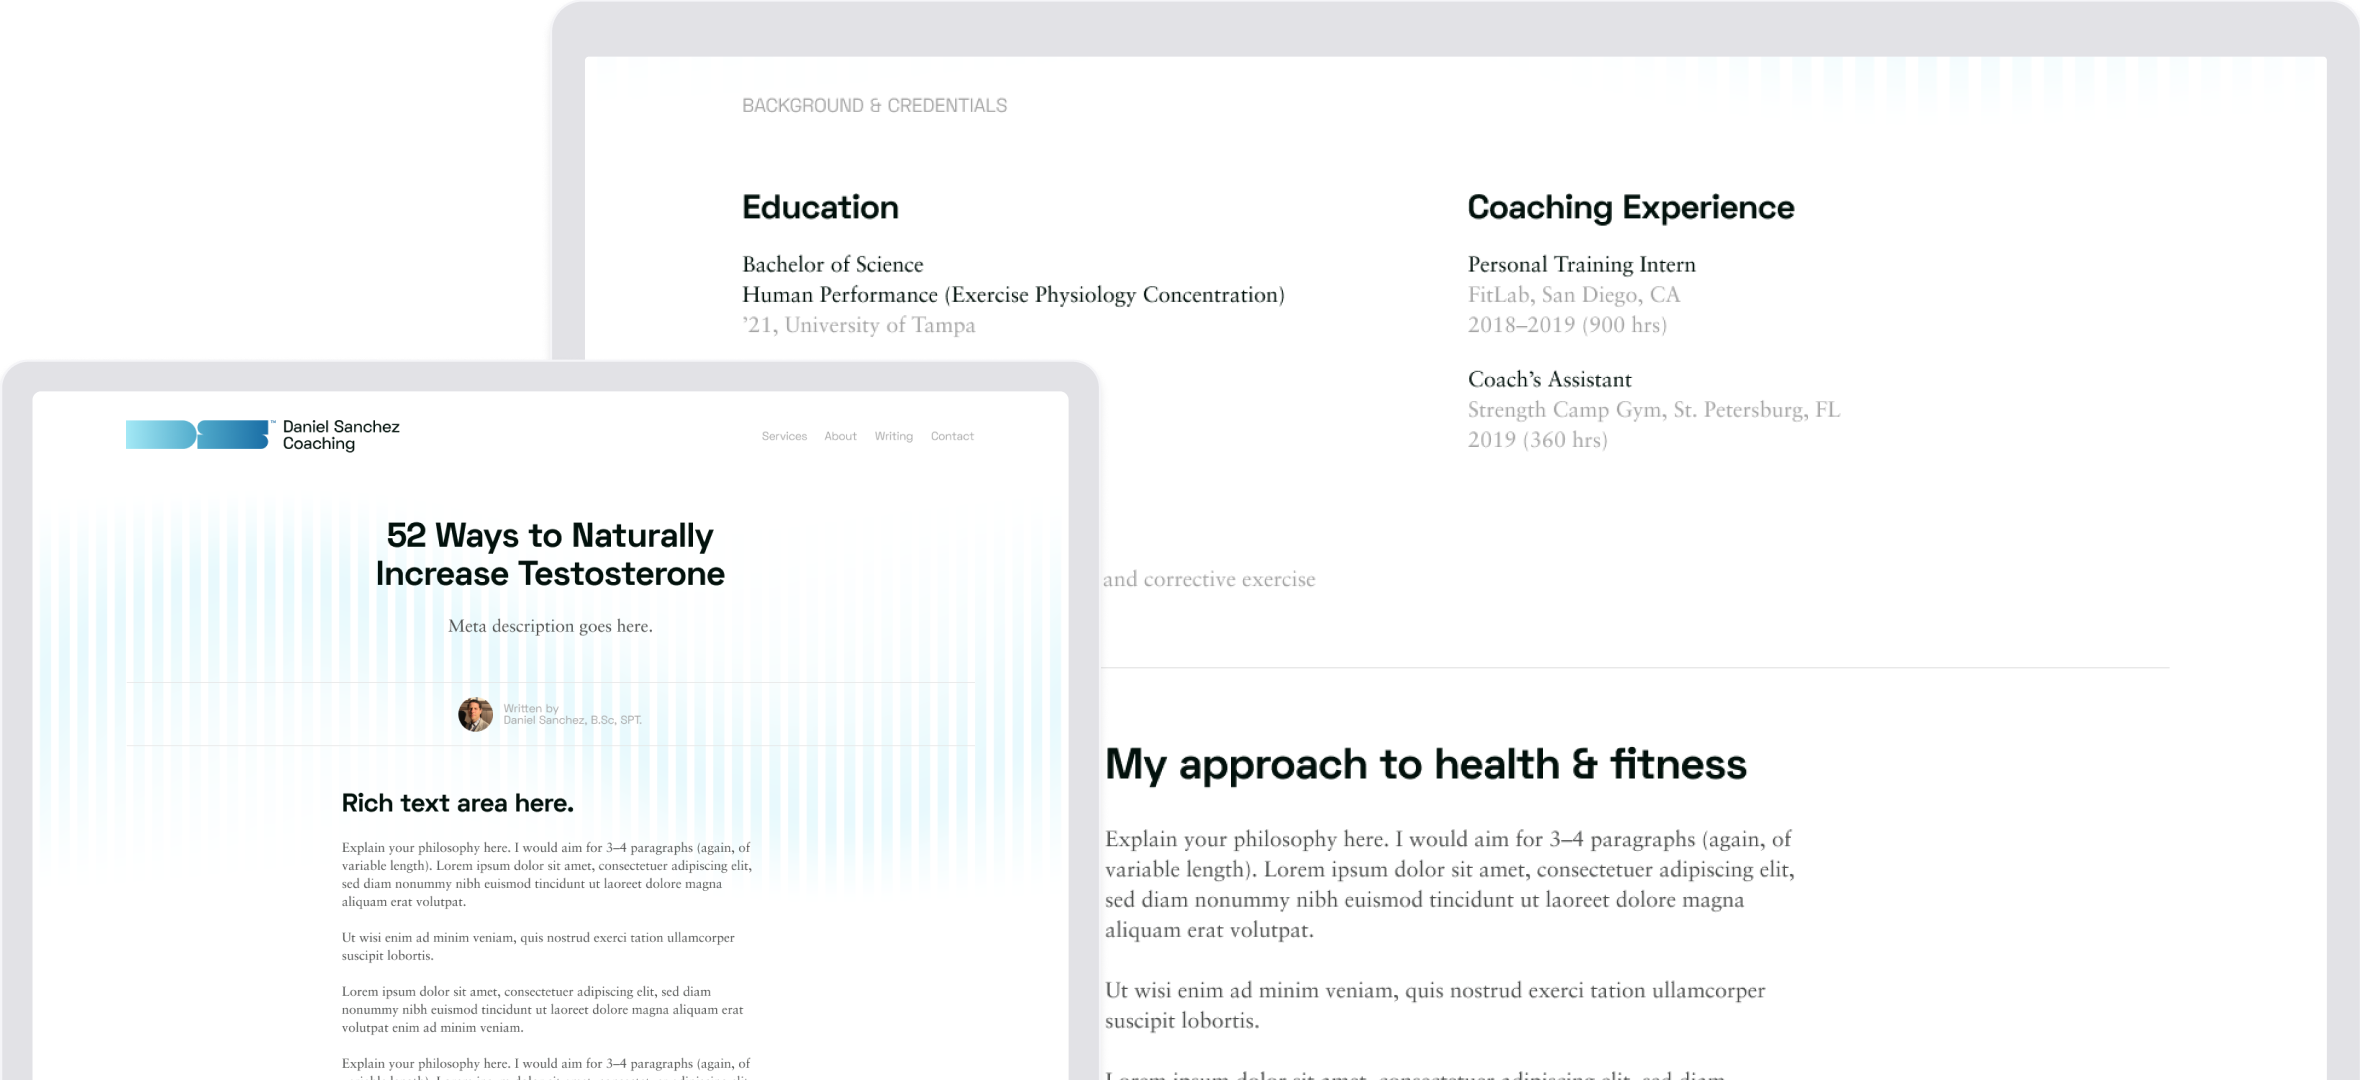 Website design for coaching/personal training business